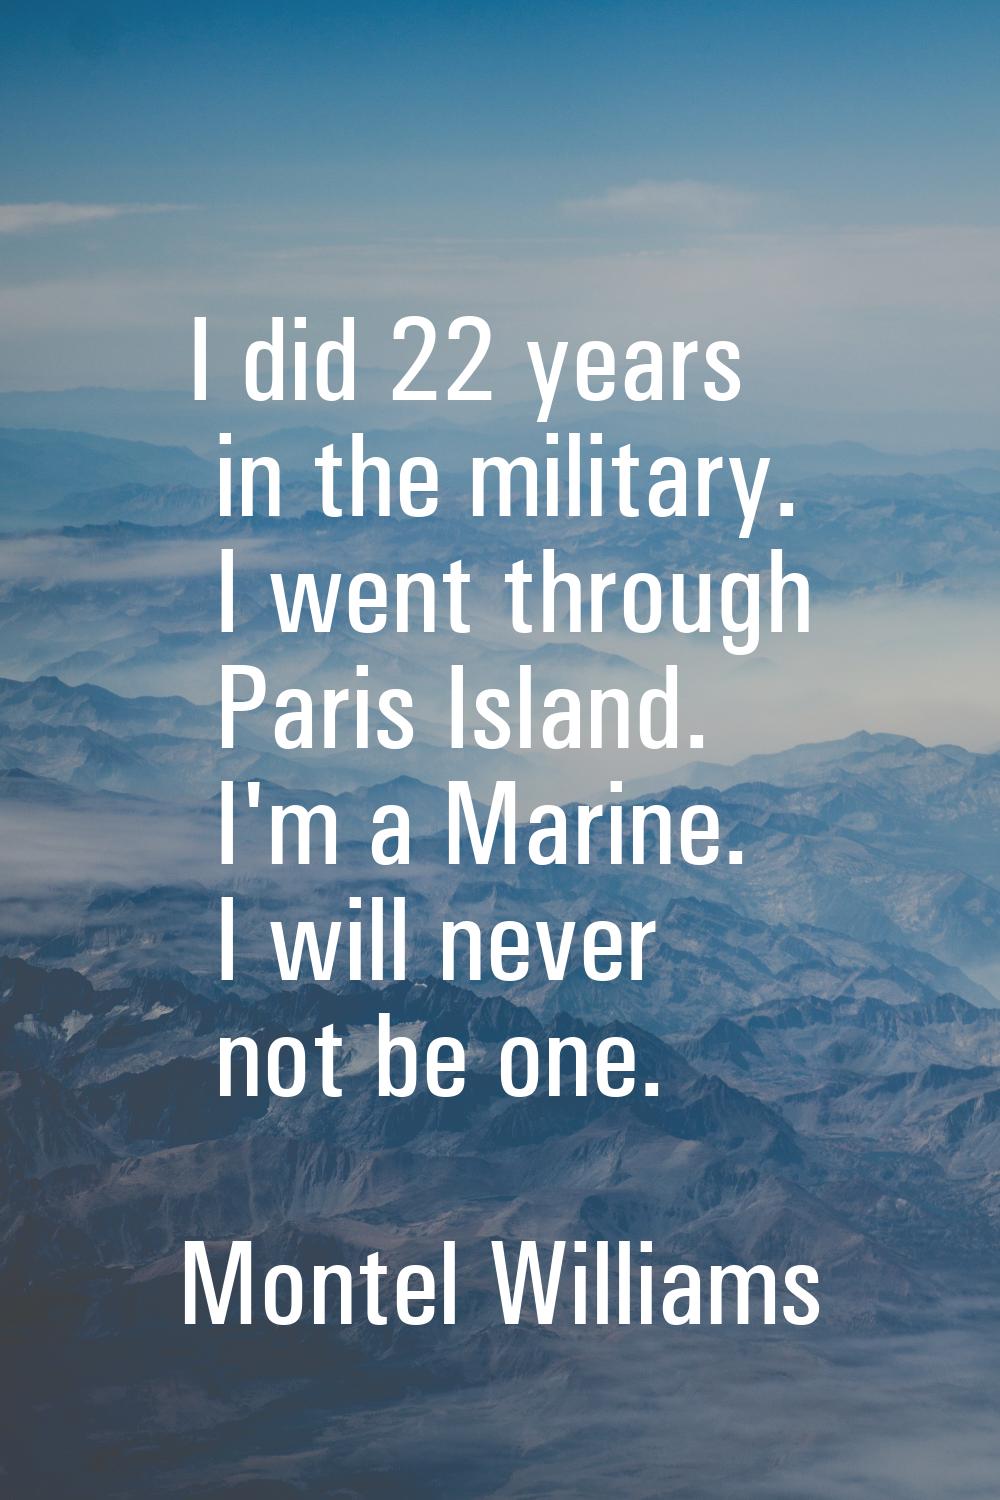 I did 22 years in the military. I went through Paris Island. I'm a Marine. I will never not be one.